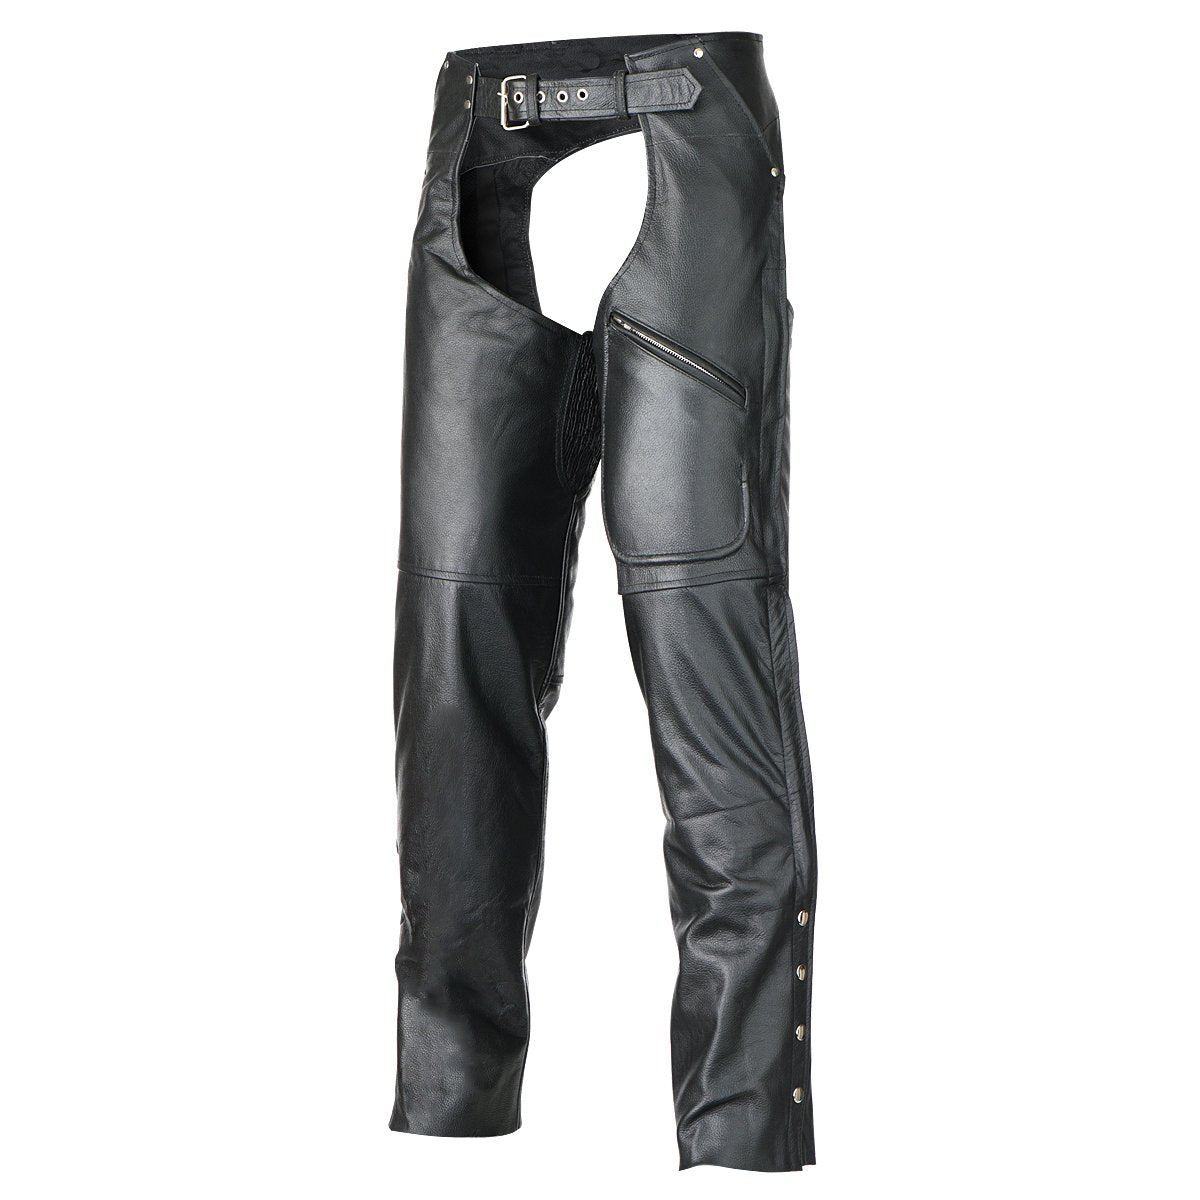 Vance Leather Women's Pants Style Zipper Pocket Naked Cowhide Leather Chaps